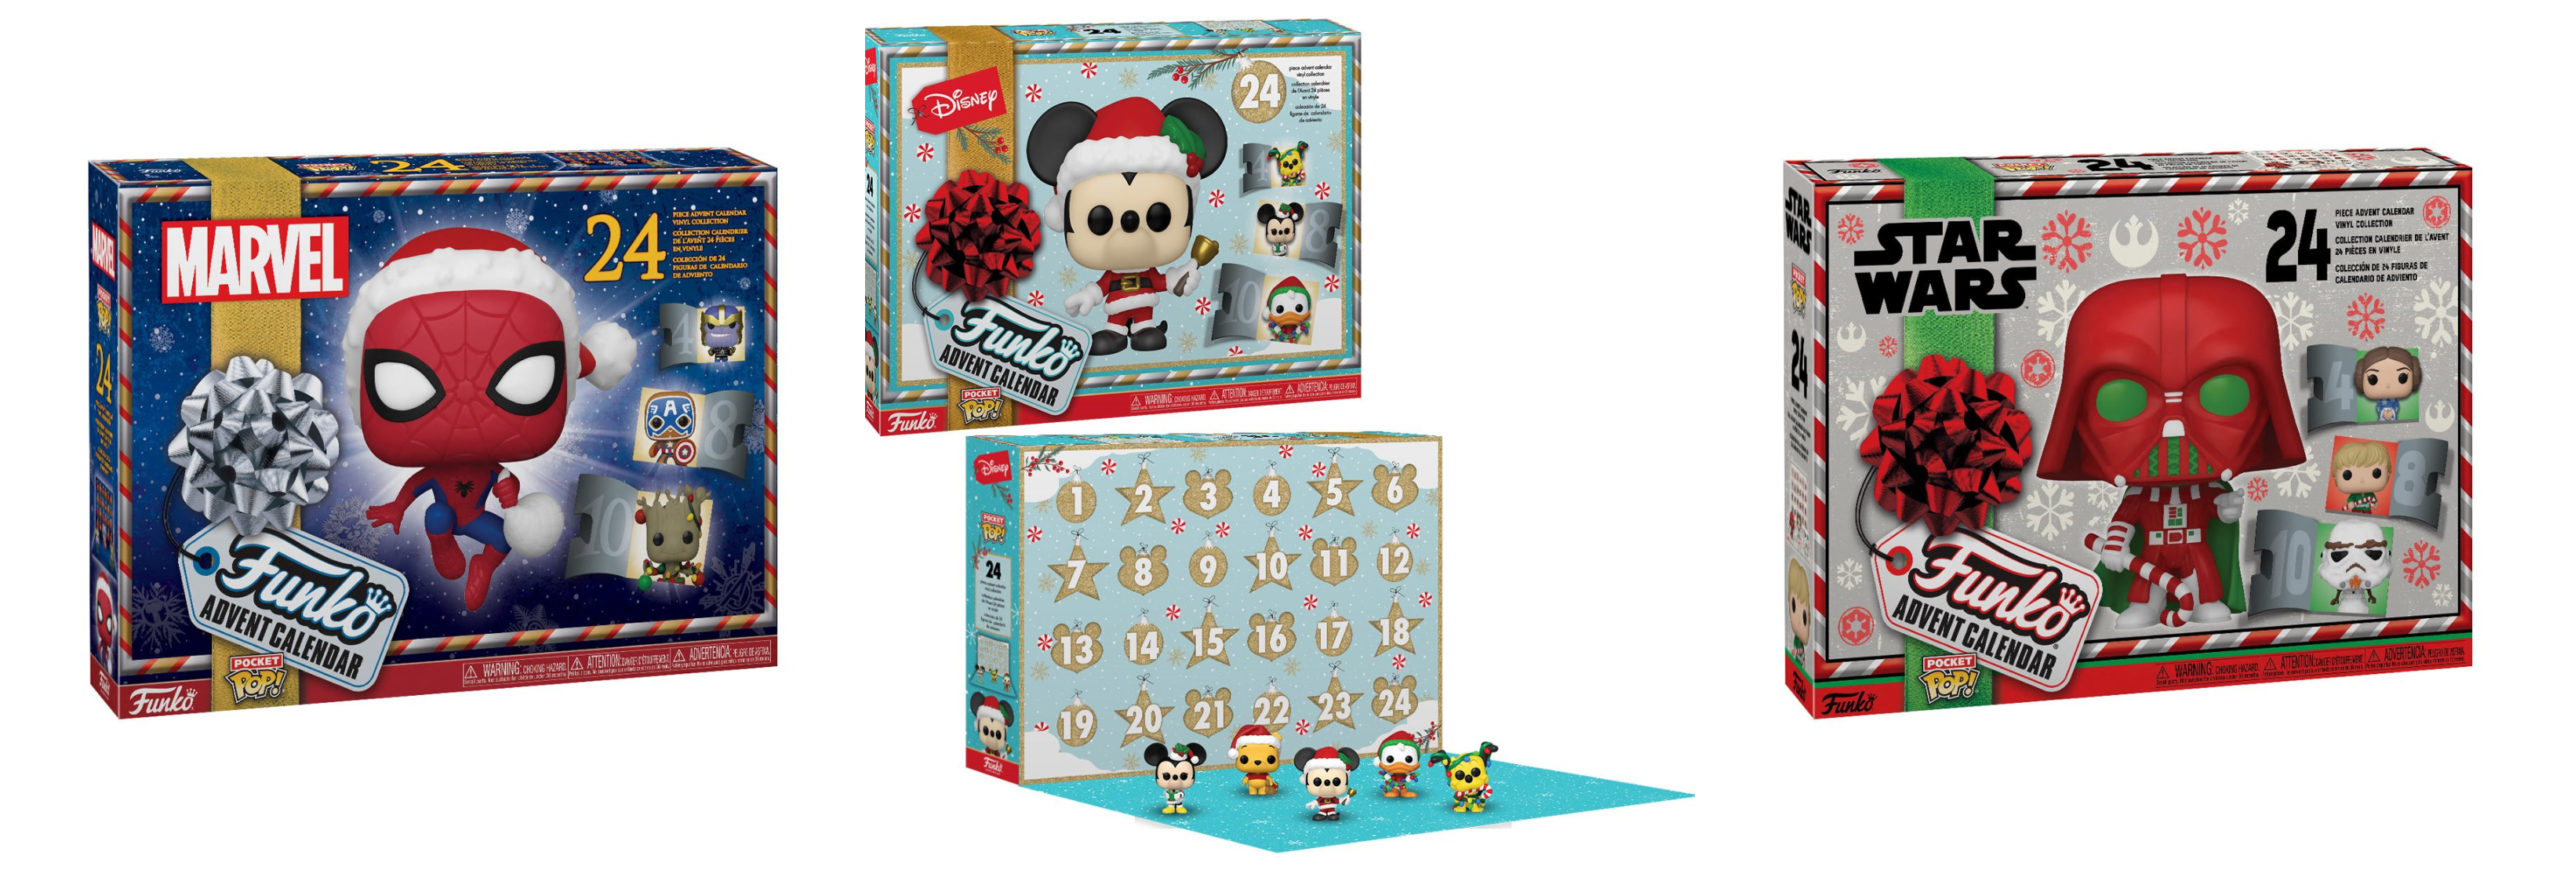 Funko Advent Calendars for Disney, Marvel, and Star Wars Now Available to  Preorder! | Dekoartikel